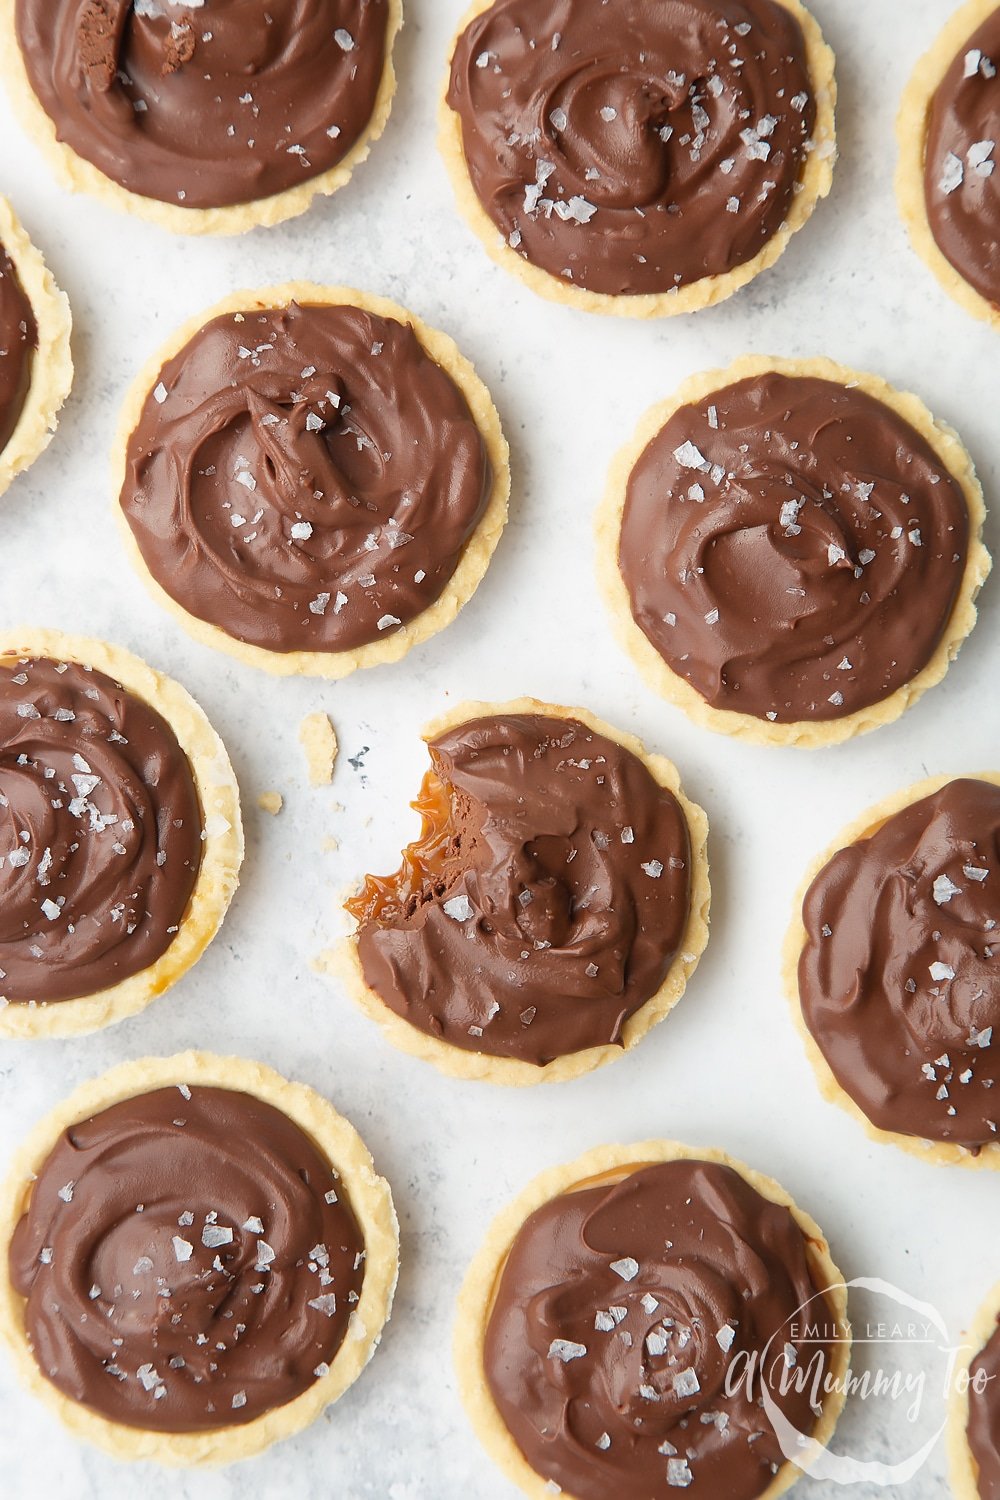 Discover how to make these delicious Baileys salted caramel mini chocolate tarts